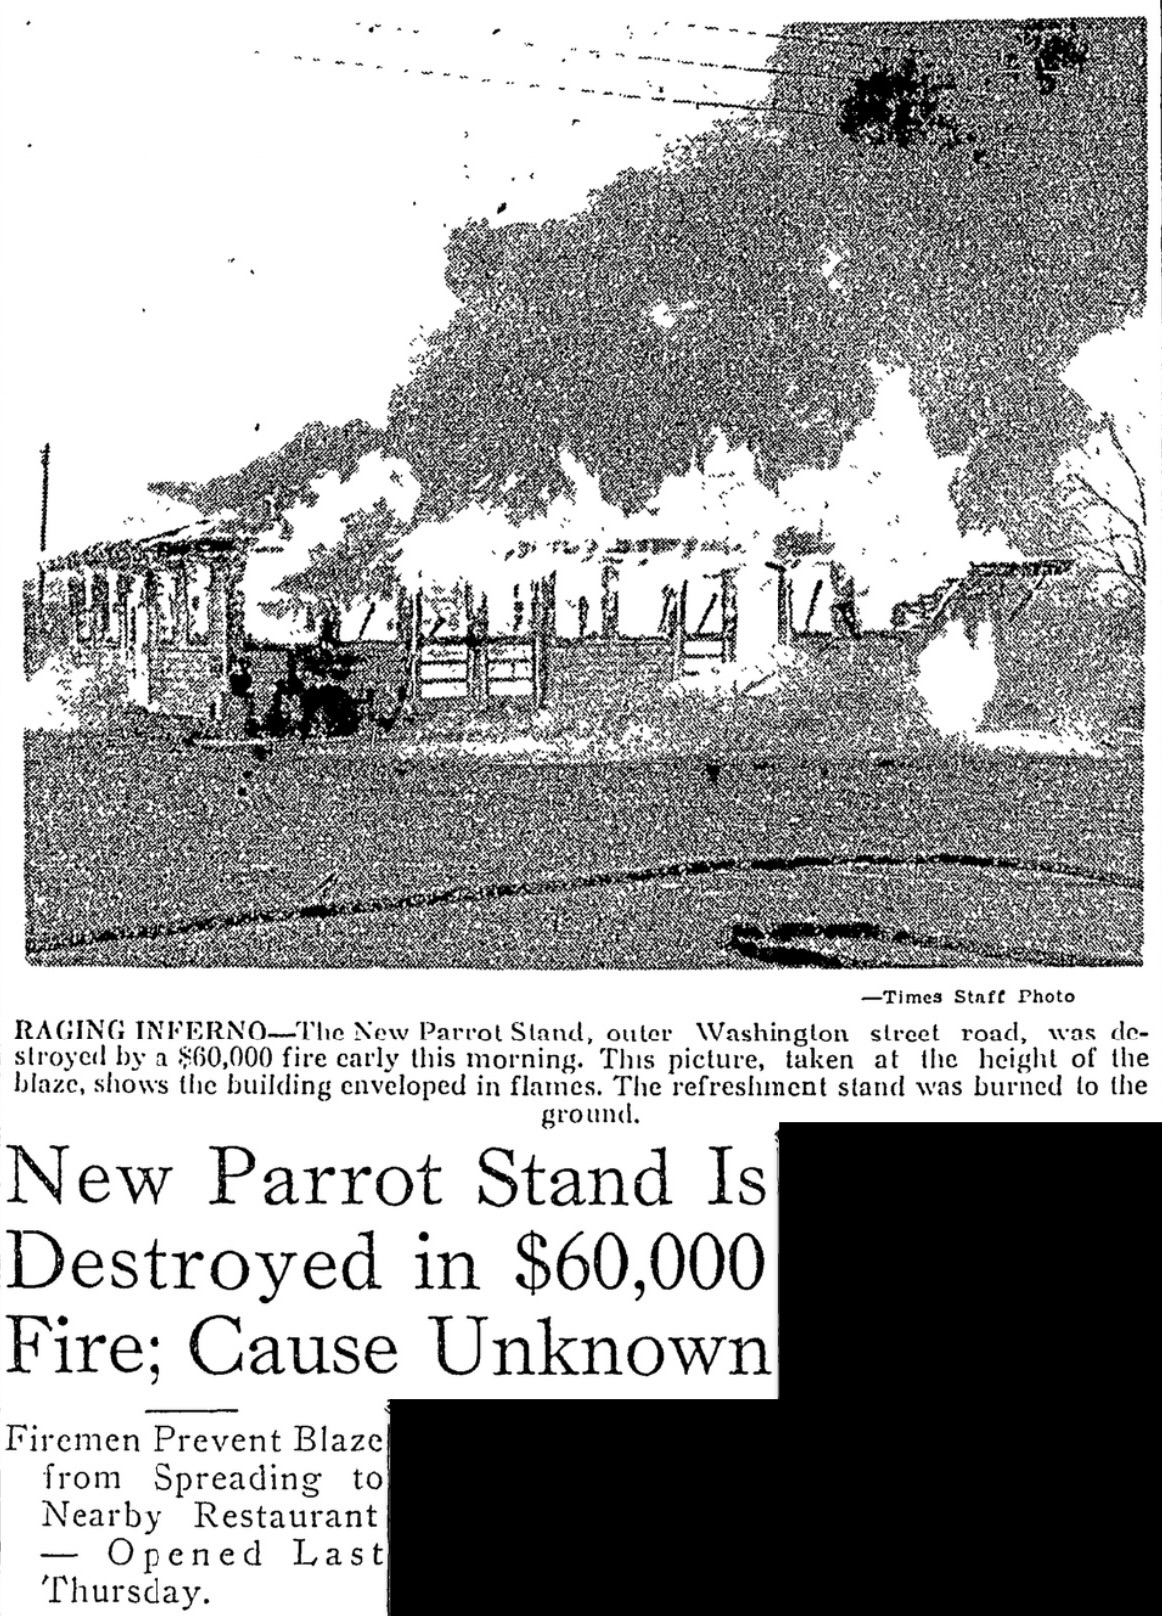 New Parrot Stand Fire, April 9, 1951